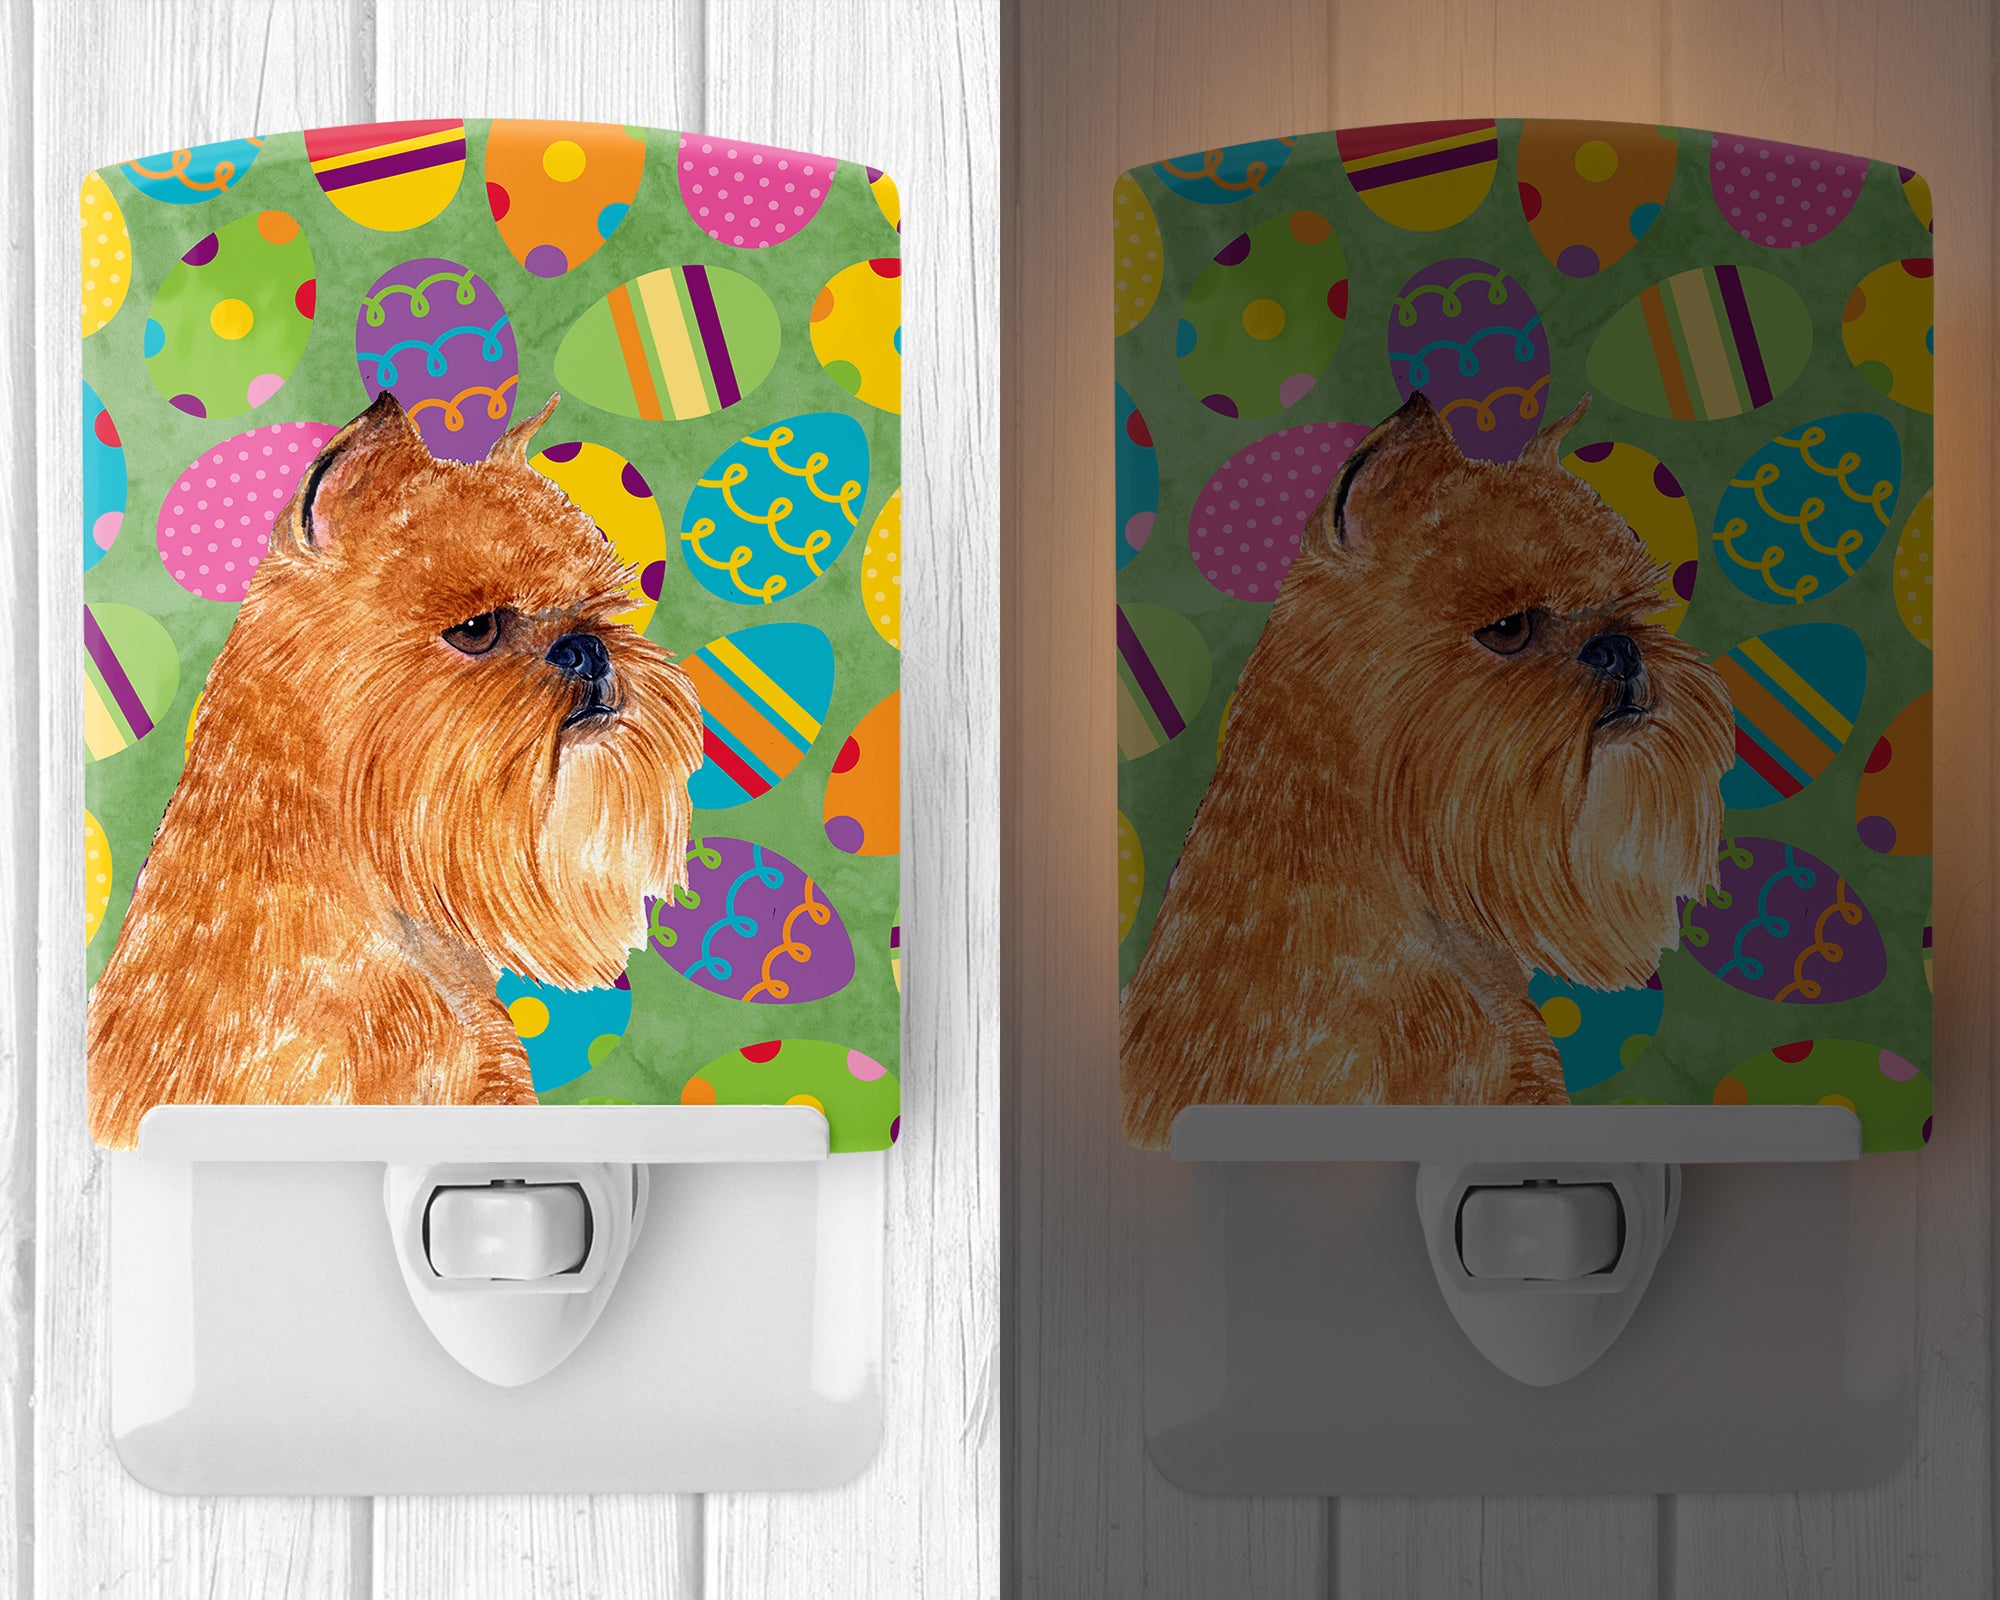 Brussels Griffon Easter Eggtravaganza Ceramic Night Light SS4839CNL - the-store.com